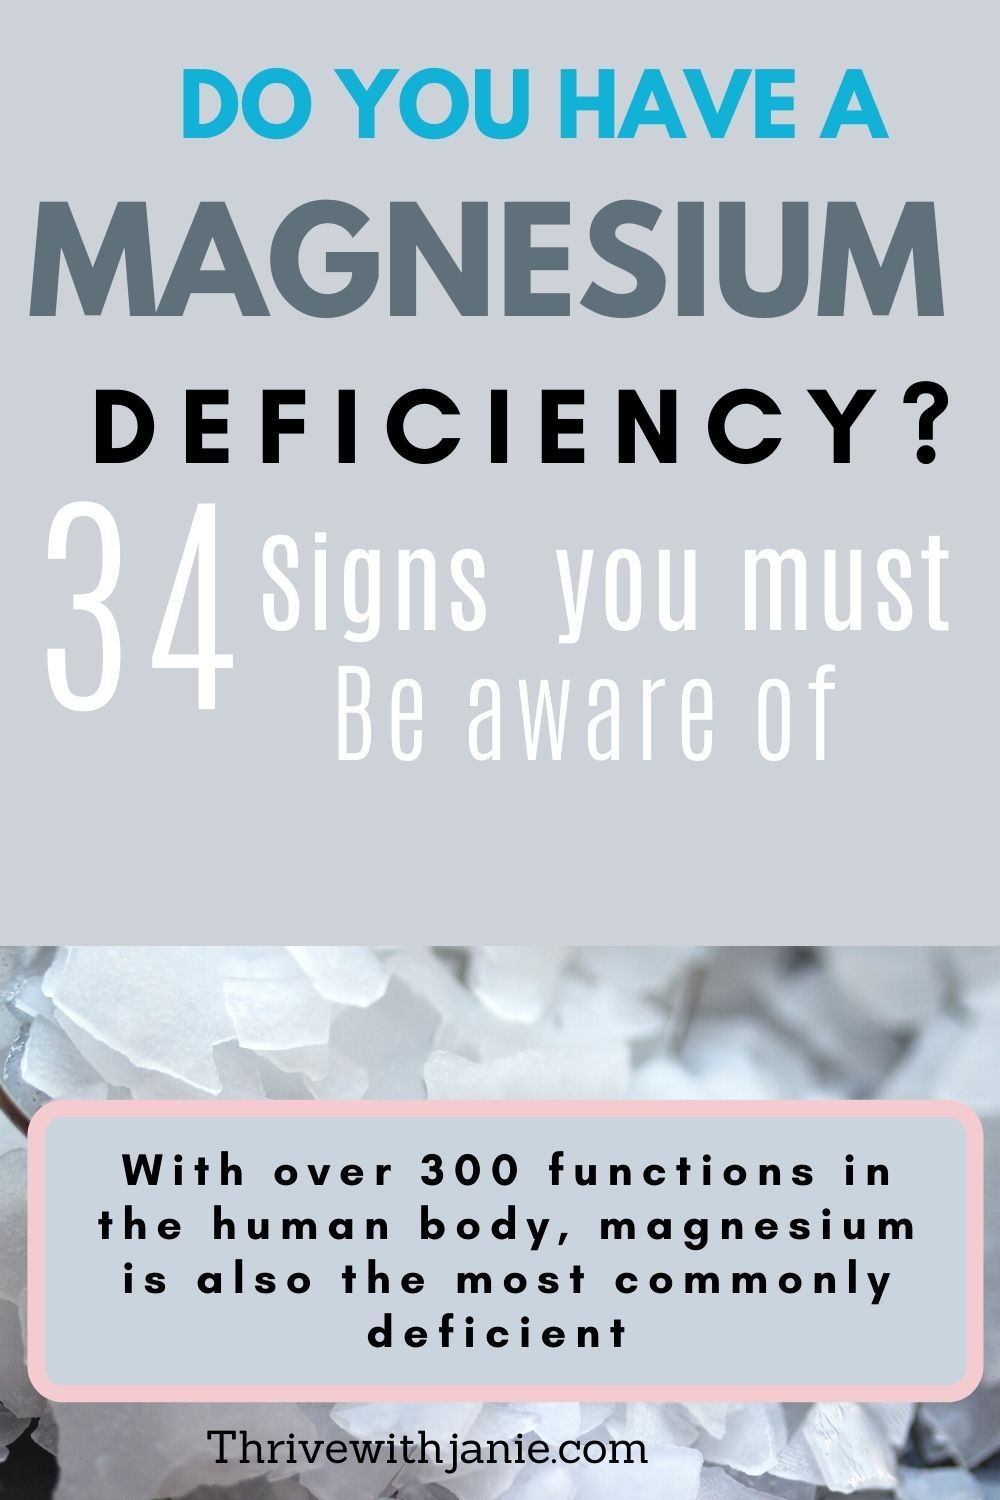 Magnesium deficiency signs and symptoms you should be aware of